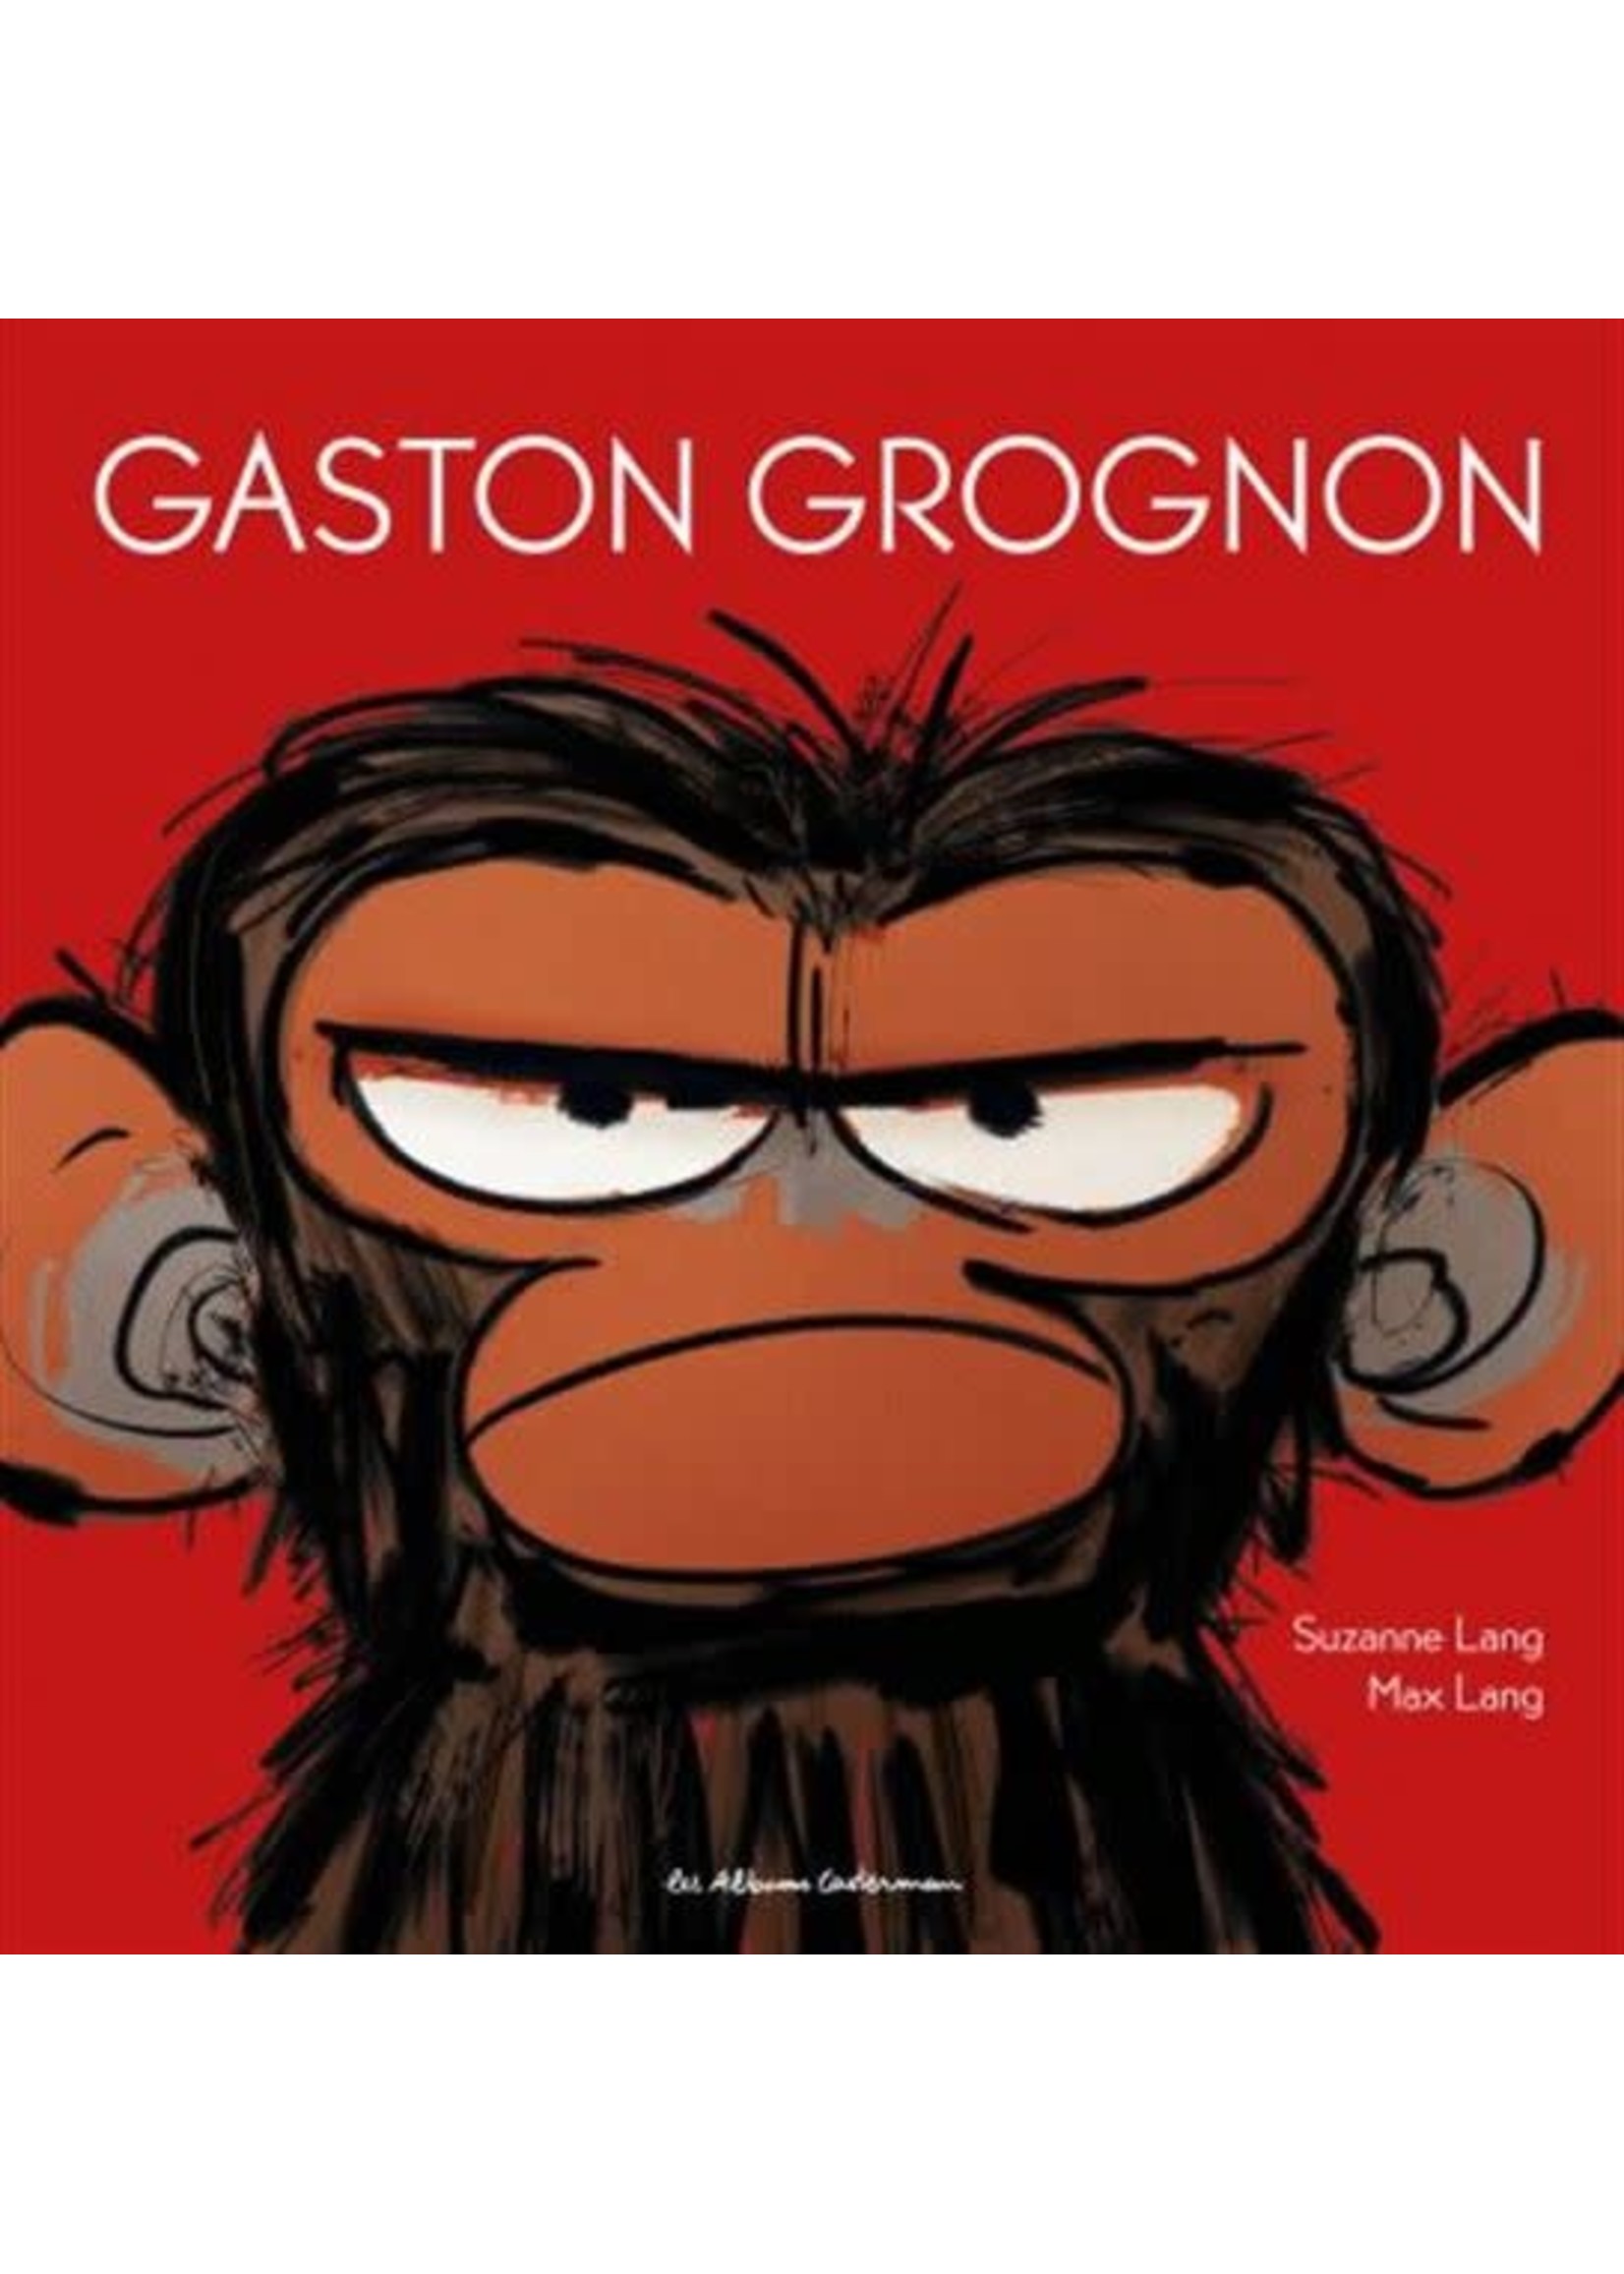 Gaston Grognon by Suzanne Lang, Max Lang